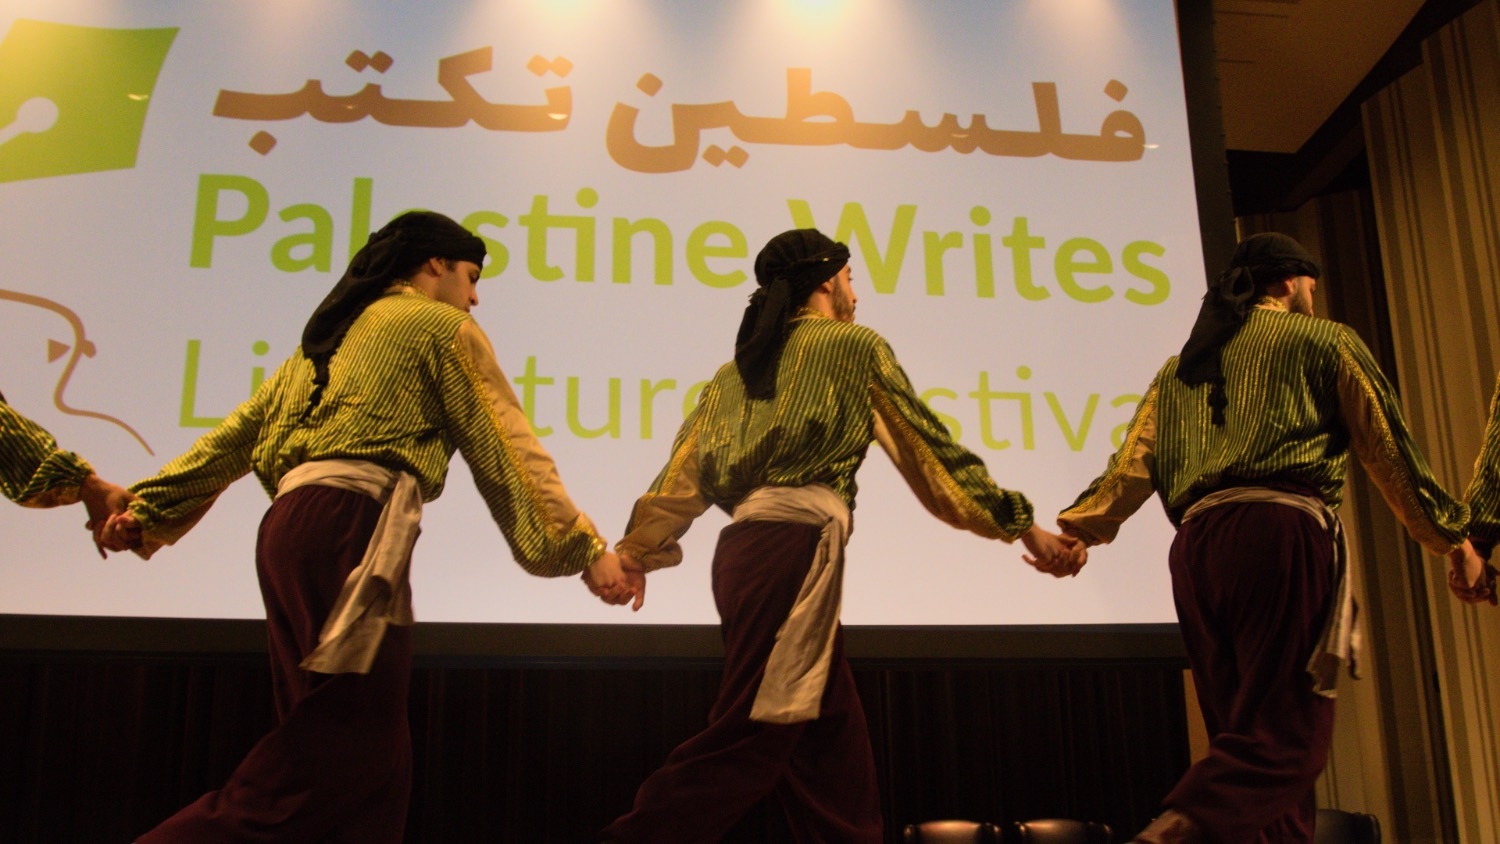 A dabke troupe performs during the opening day of the Palestine Writes literature festival.